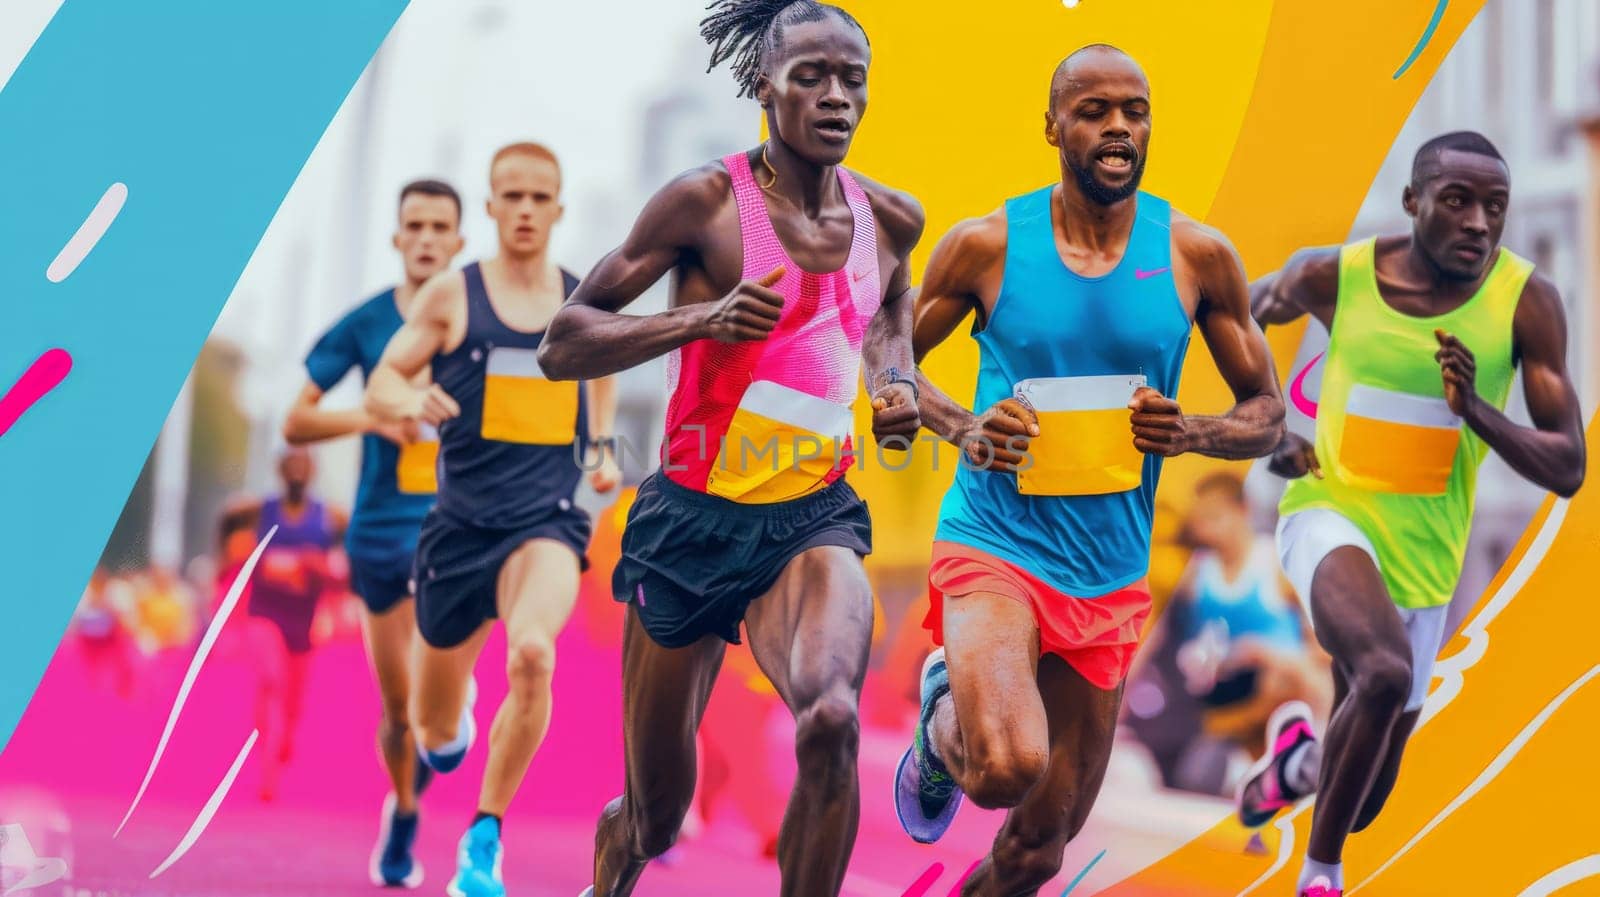 group of marathon runners, sport and activity background or banner poster.